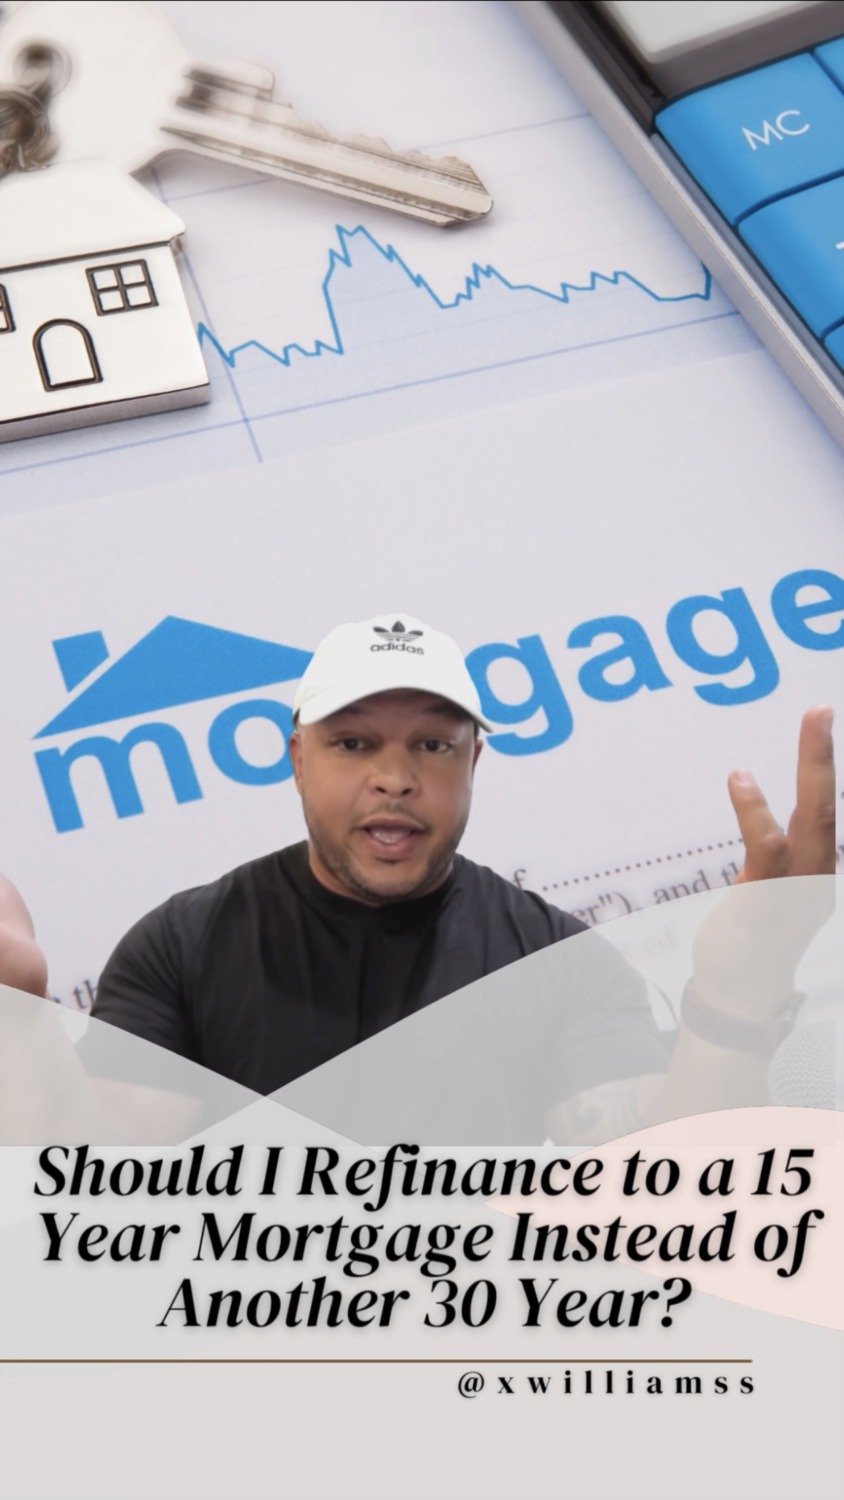 Should I Refinance From a 30 Year to 15 Year Mortgage?